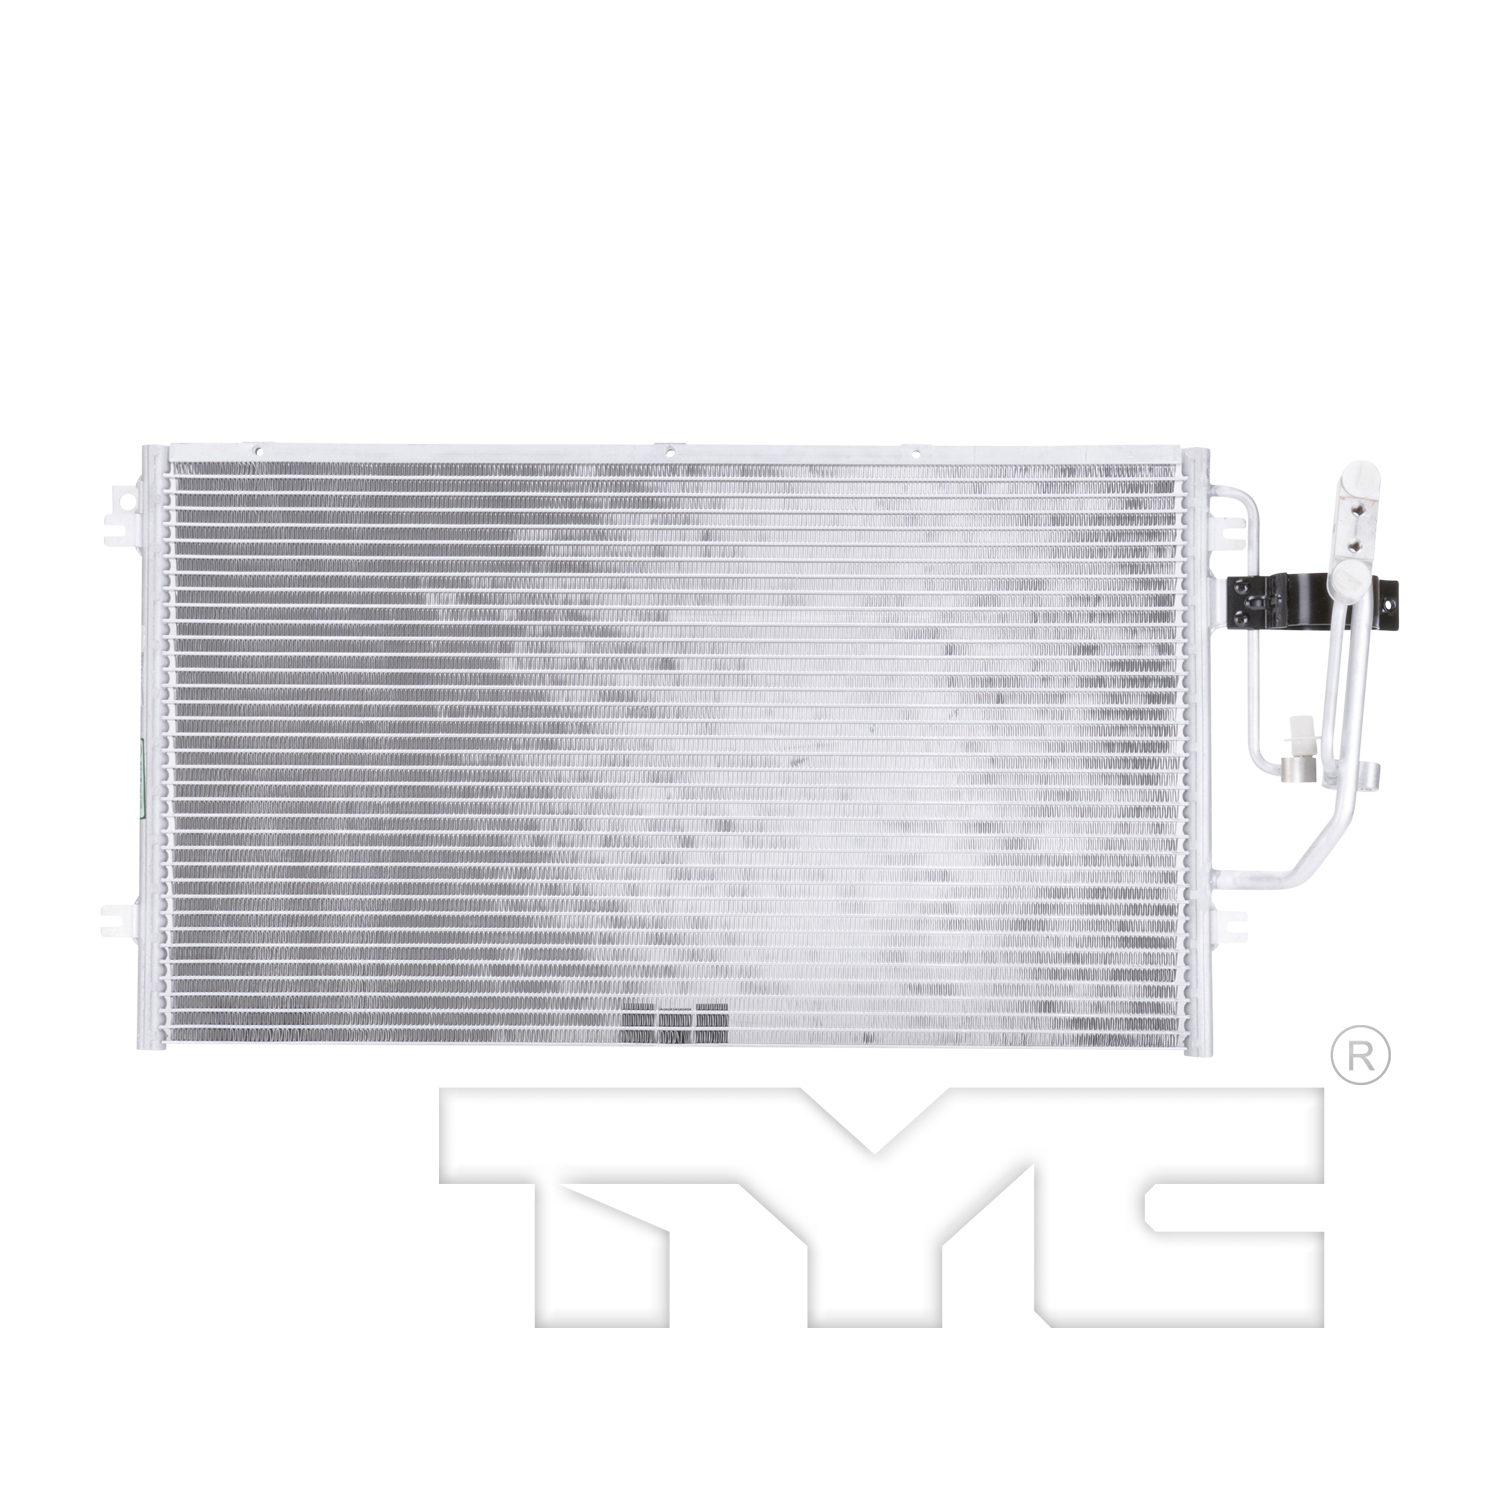 Aftermarket AC CONDENSERS for SATURN - LS1, LS1,00-00,Air conditioning condenser